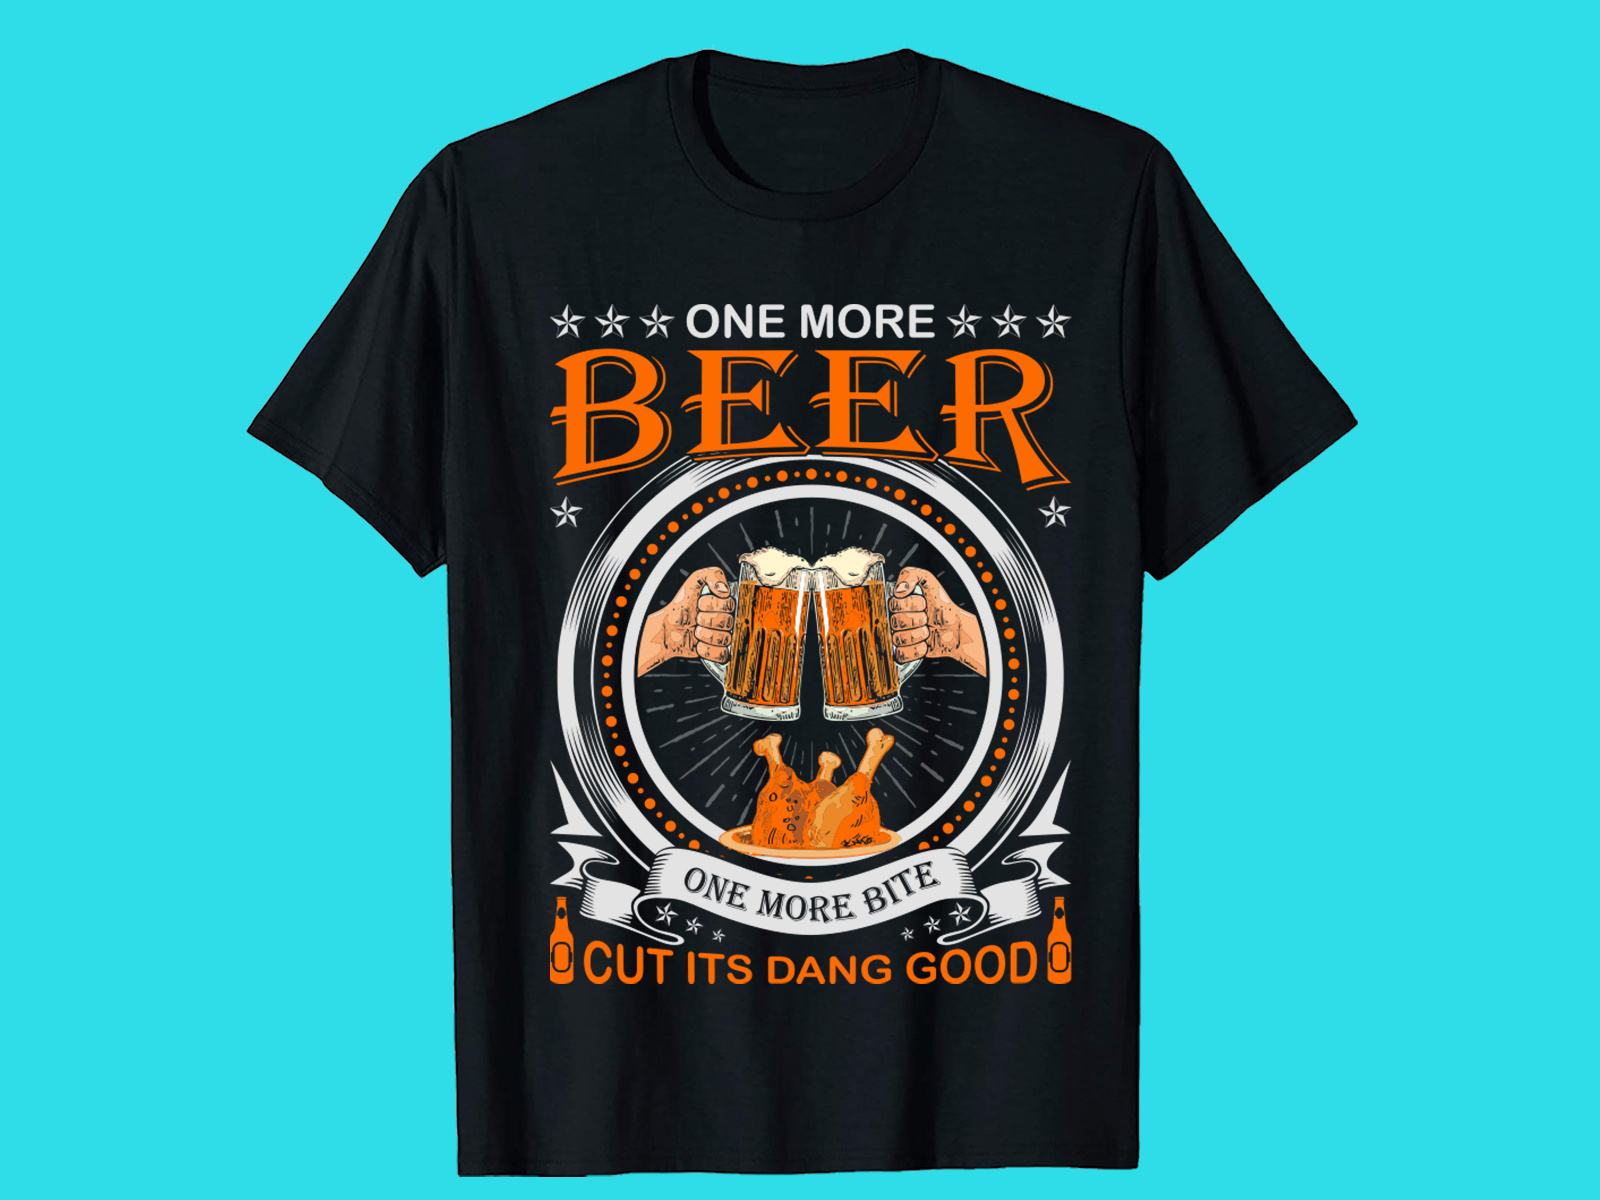 ONE MORE BEER T-SHIRT DESIGN by Shanta islam on Dribbble